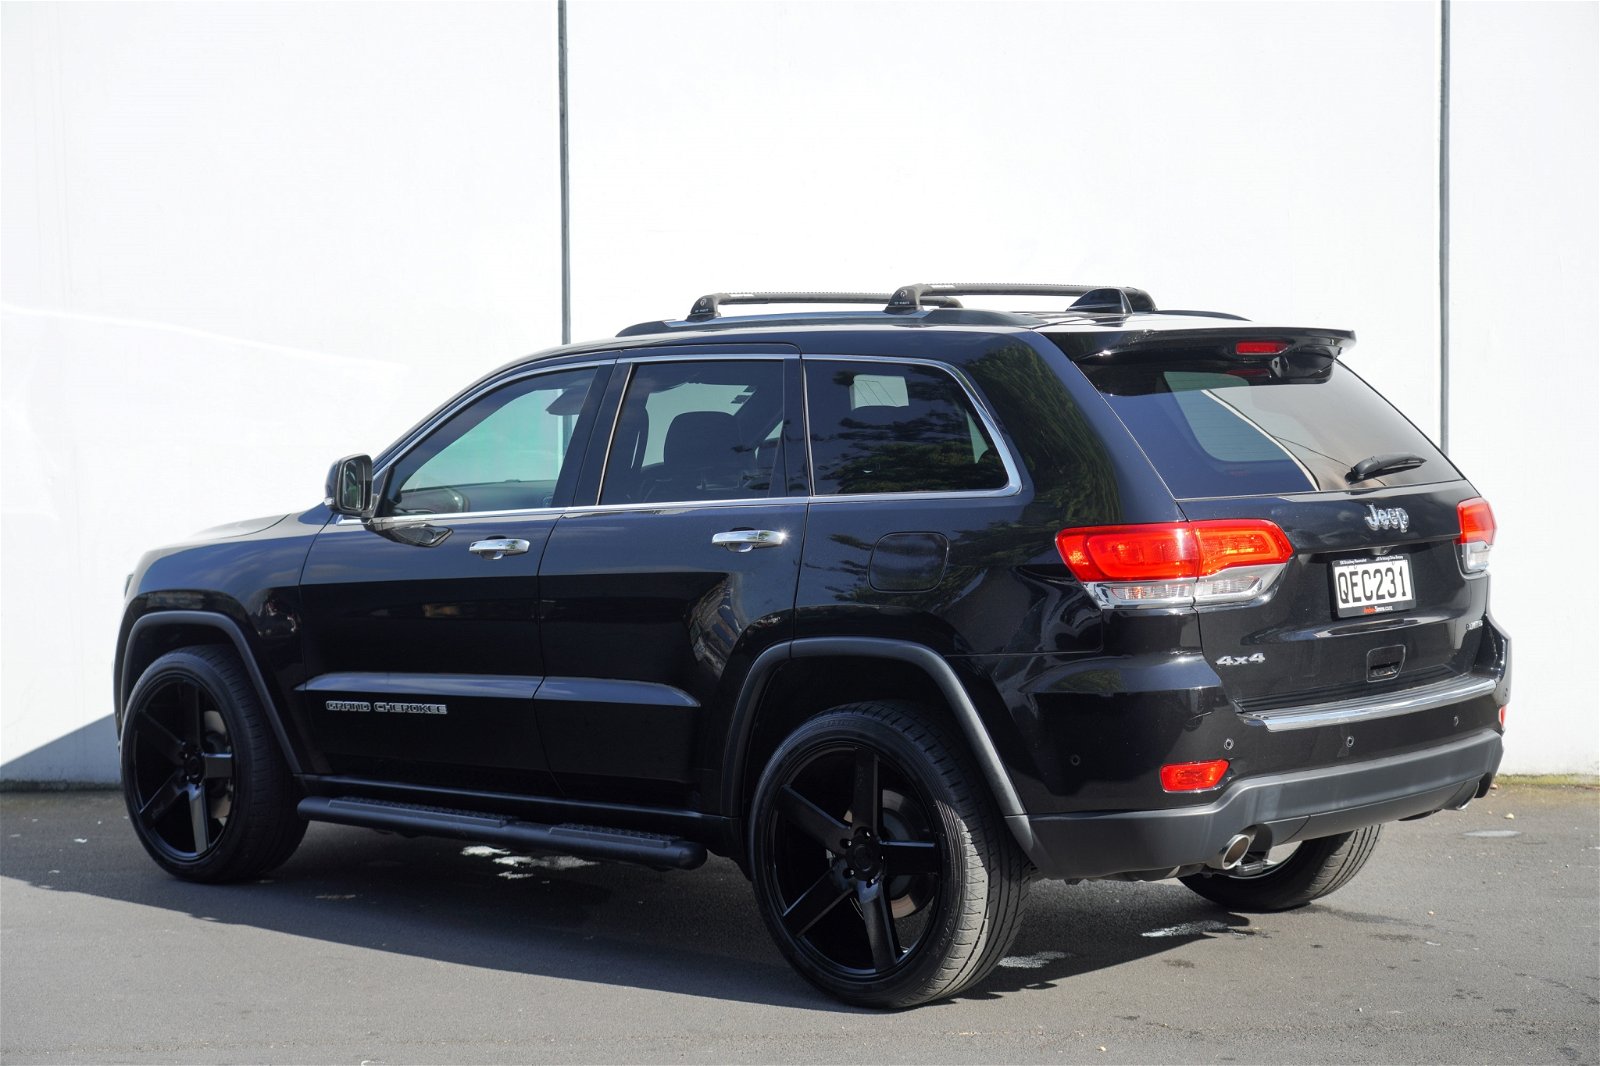 2018 Jeep Grand Cherokee Limited 3.6P 4WD 8A 5Dr Wagon